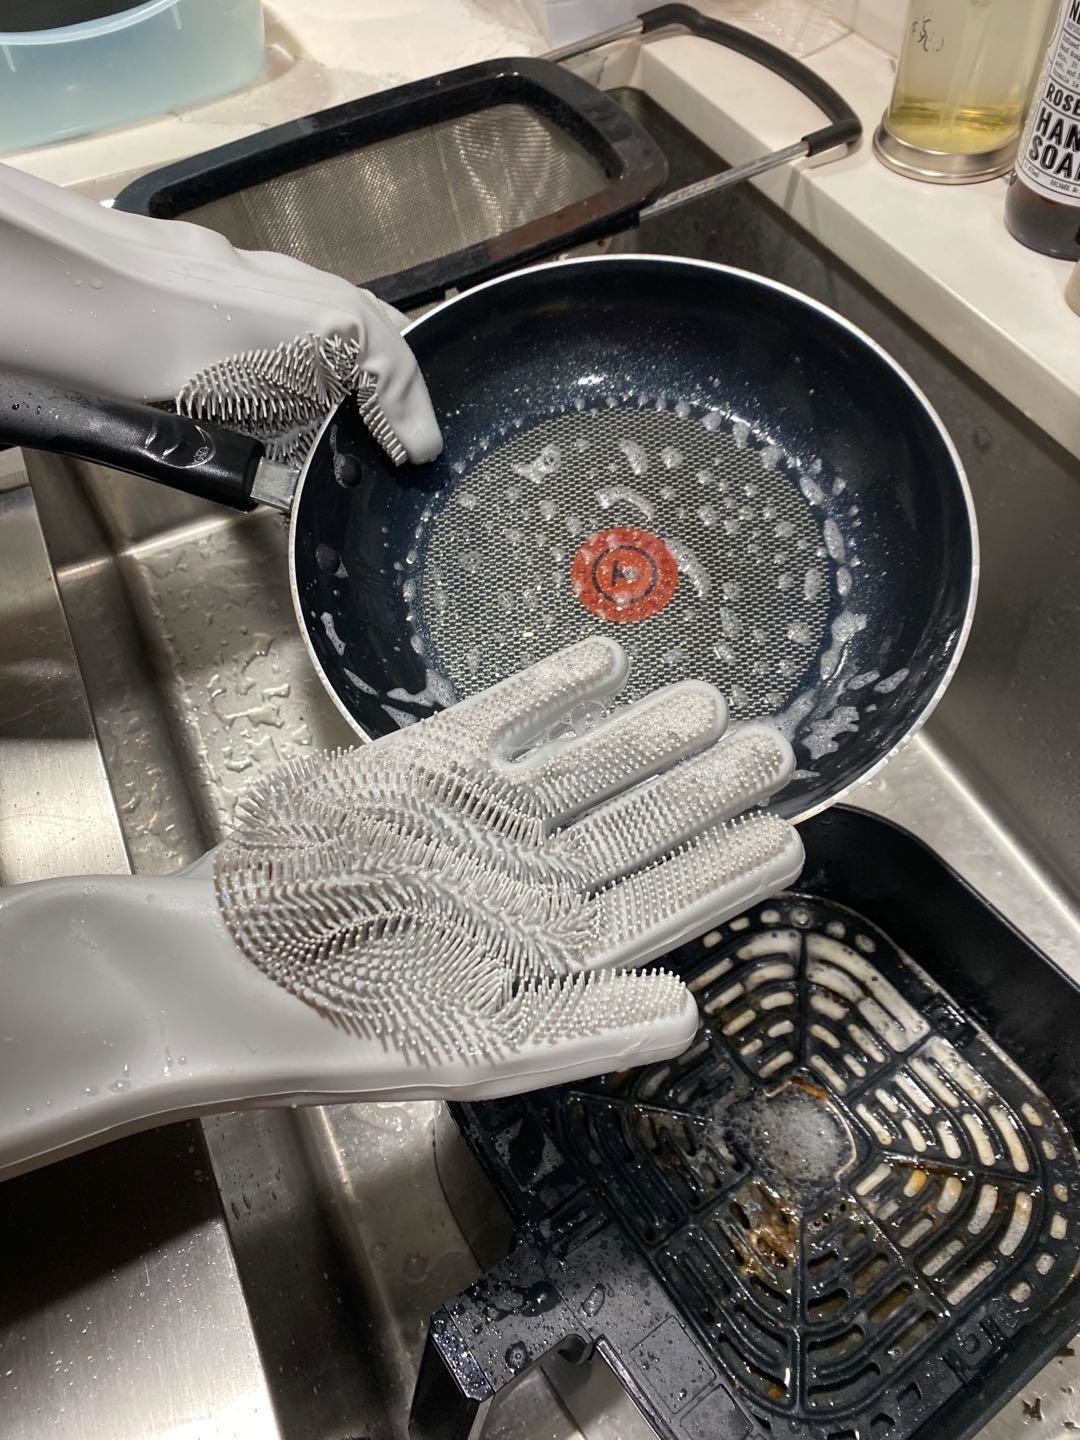 Reviewer washing dishes with gloves